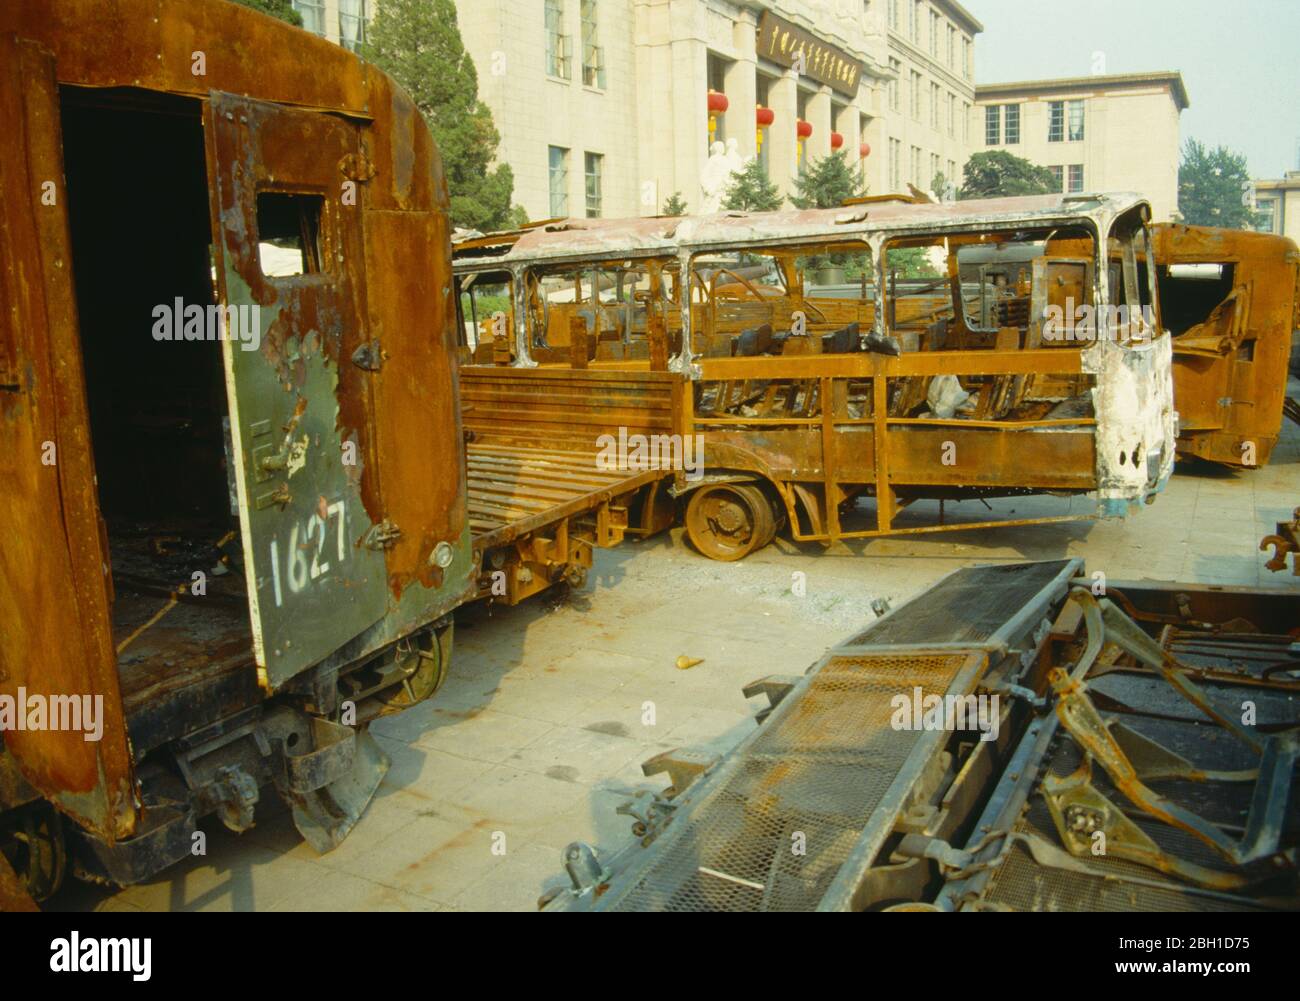 China, Beijing, Military Museum propaganda display of burnt out buses and army trucks resulting from alledged riots. Stock Photo